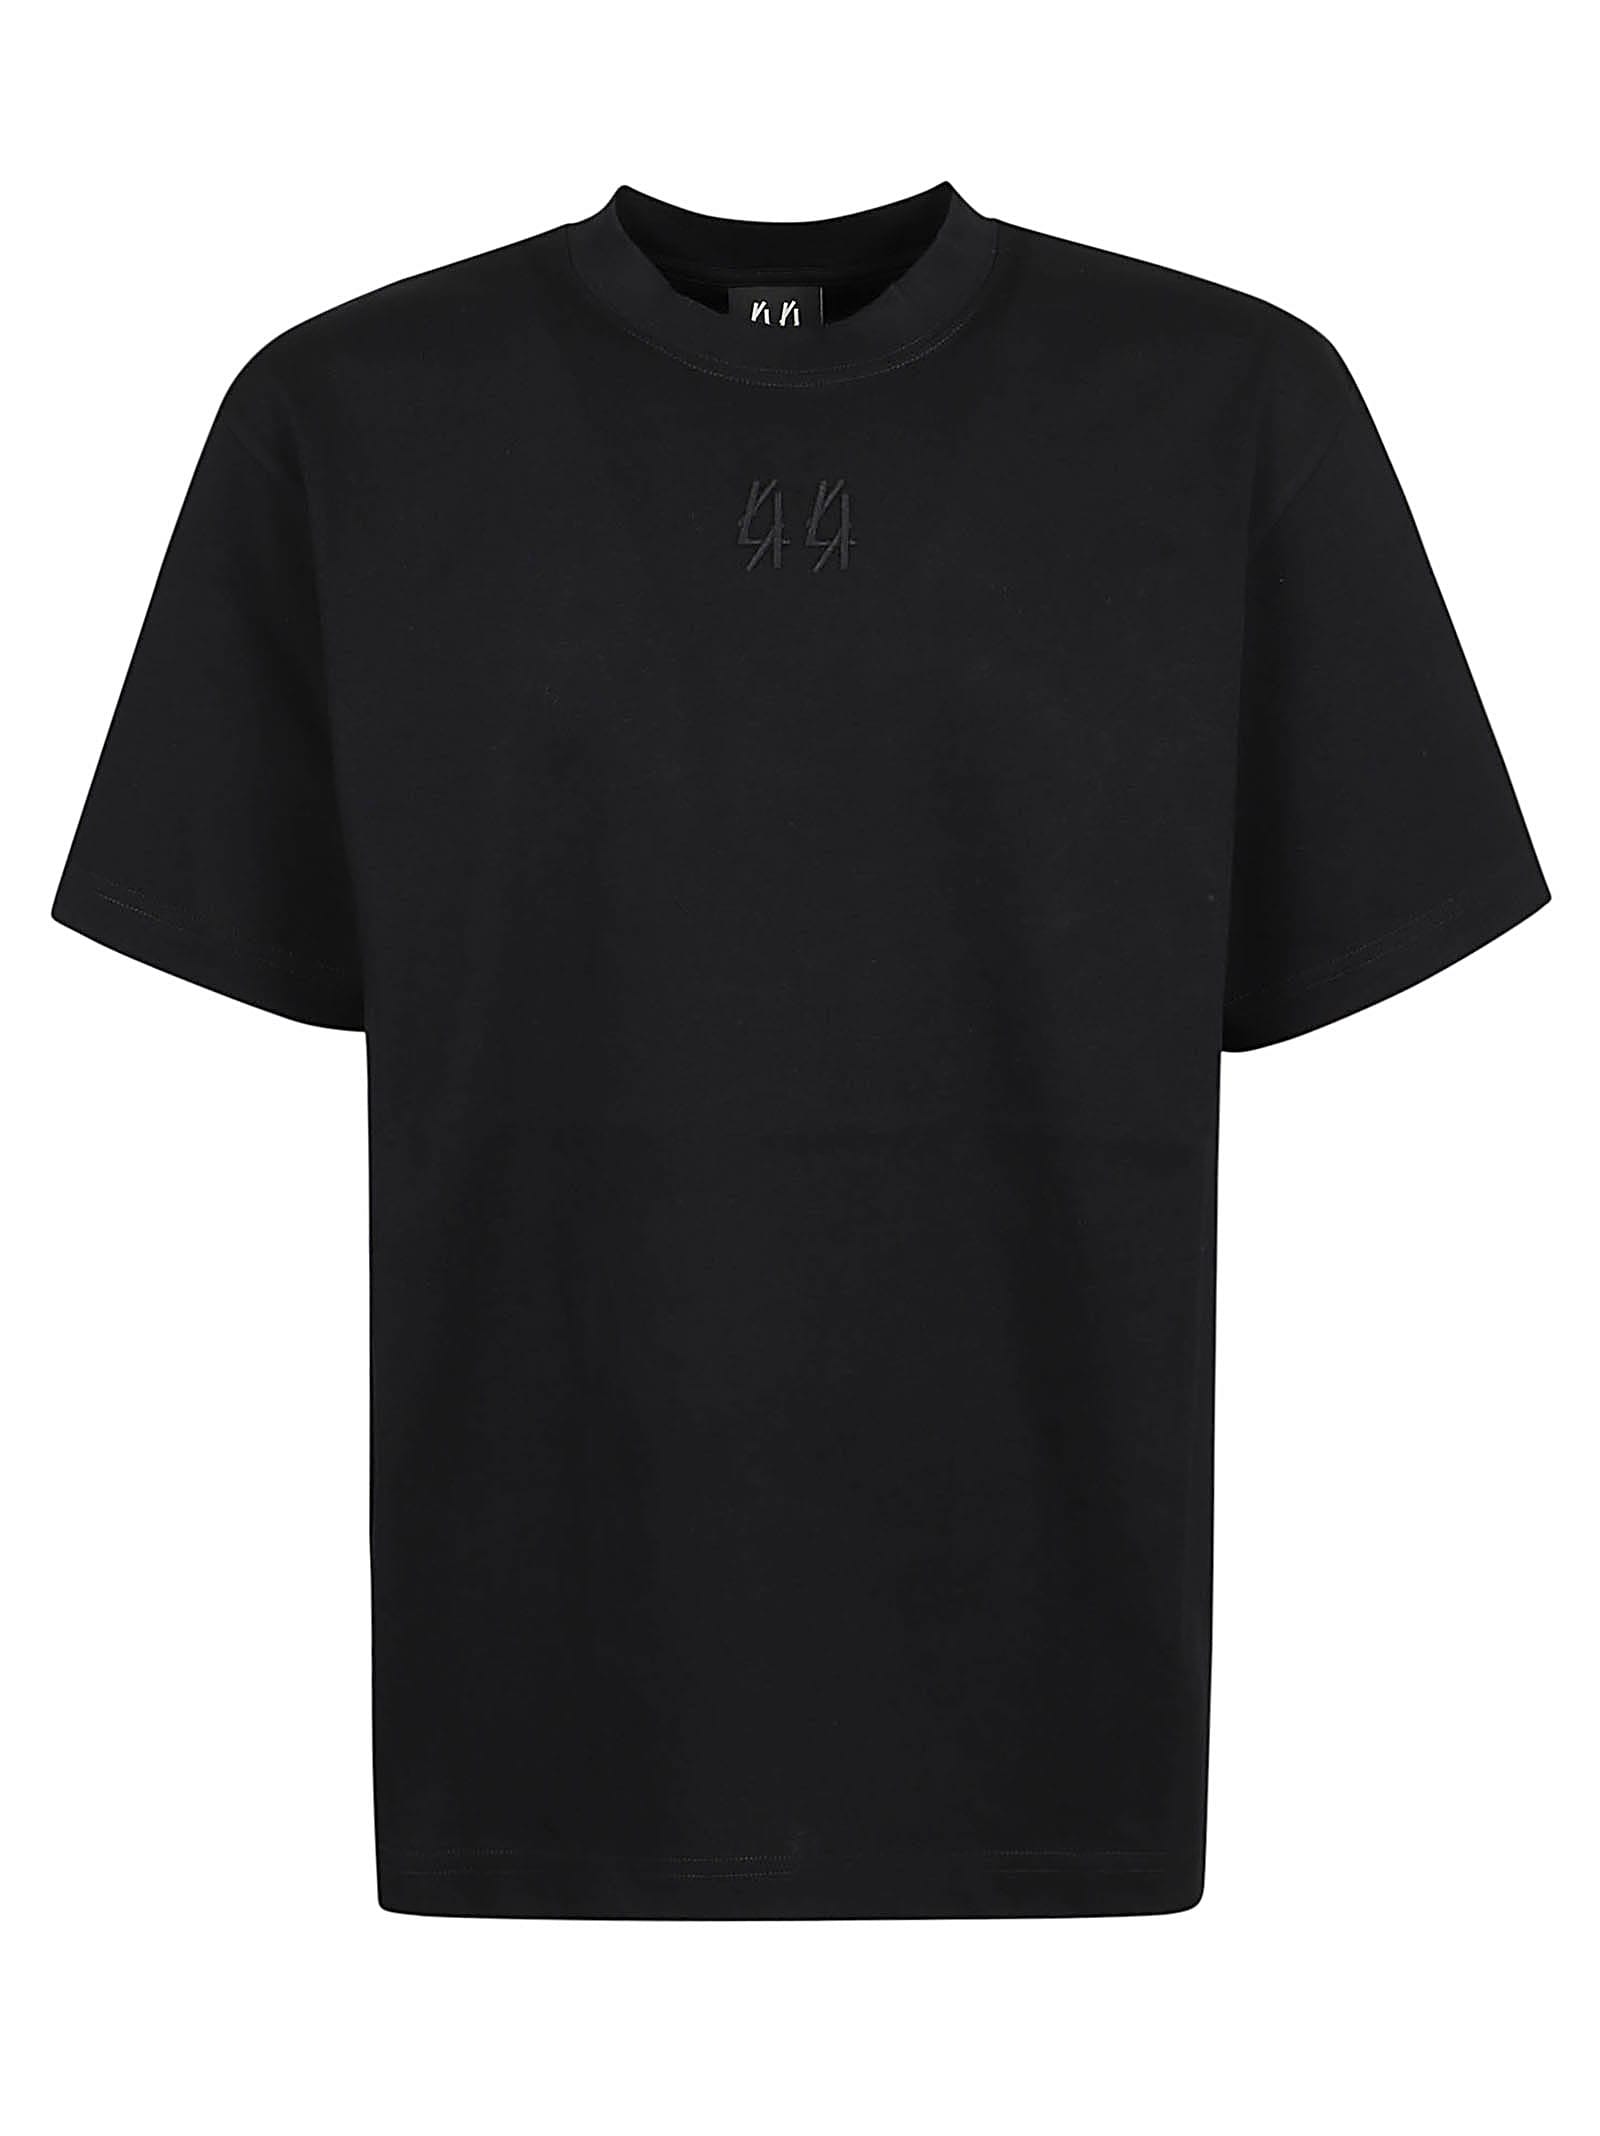 44 Label Group Classic Tee In Gaffer Print